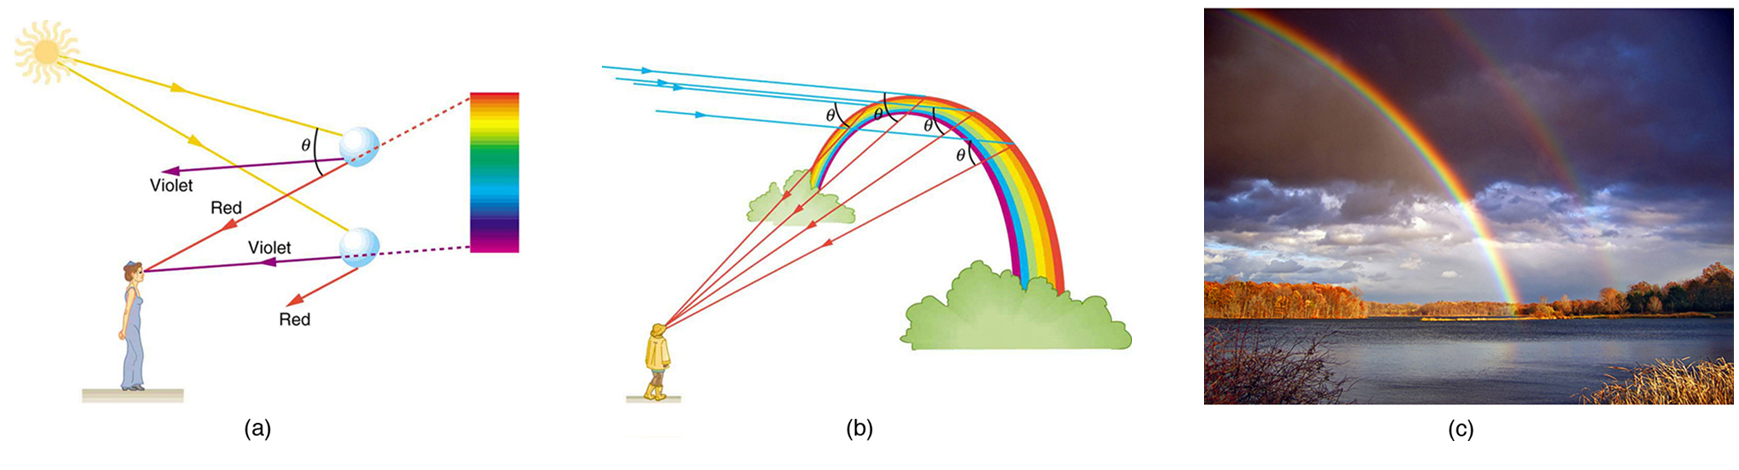 In figure (a) sunlight is incident on two water droplets close to one another. The incident rays undergo refraction and total internal reflection. From the first droplet, violet color emerges and from the second, red emerges. A woman observes from a distance, the band of seven colors with red on top and violet at the bottom. Two rays each from red and violet reach the observer’s eyes. The angle of separation between the incident light and the emerging red light is theta. In figure (b), a man looks at the rainbow, which is in the shape of an arc. A parallel beam of blue colored rays fall on the rainbow at different positions and then reaches the observer, each ray making the same angle theta with the incident ray. The rays reaching the observer are red in color. Figure (c) shows a spectacular double rainbow in the sky with white clouds as a backdrop.